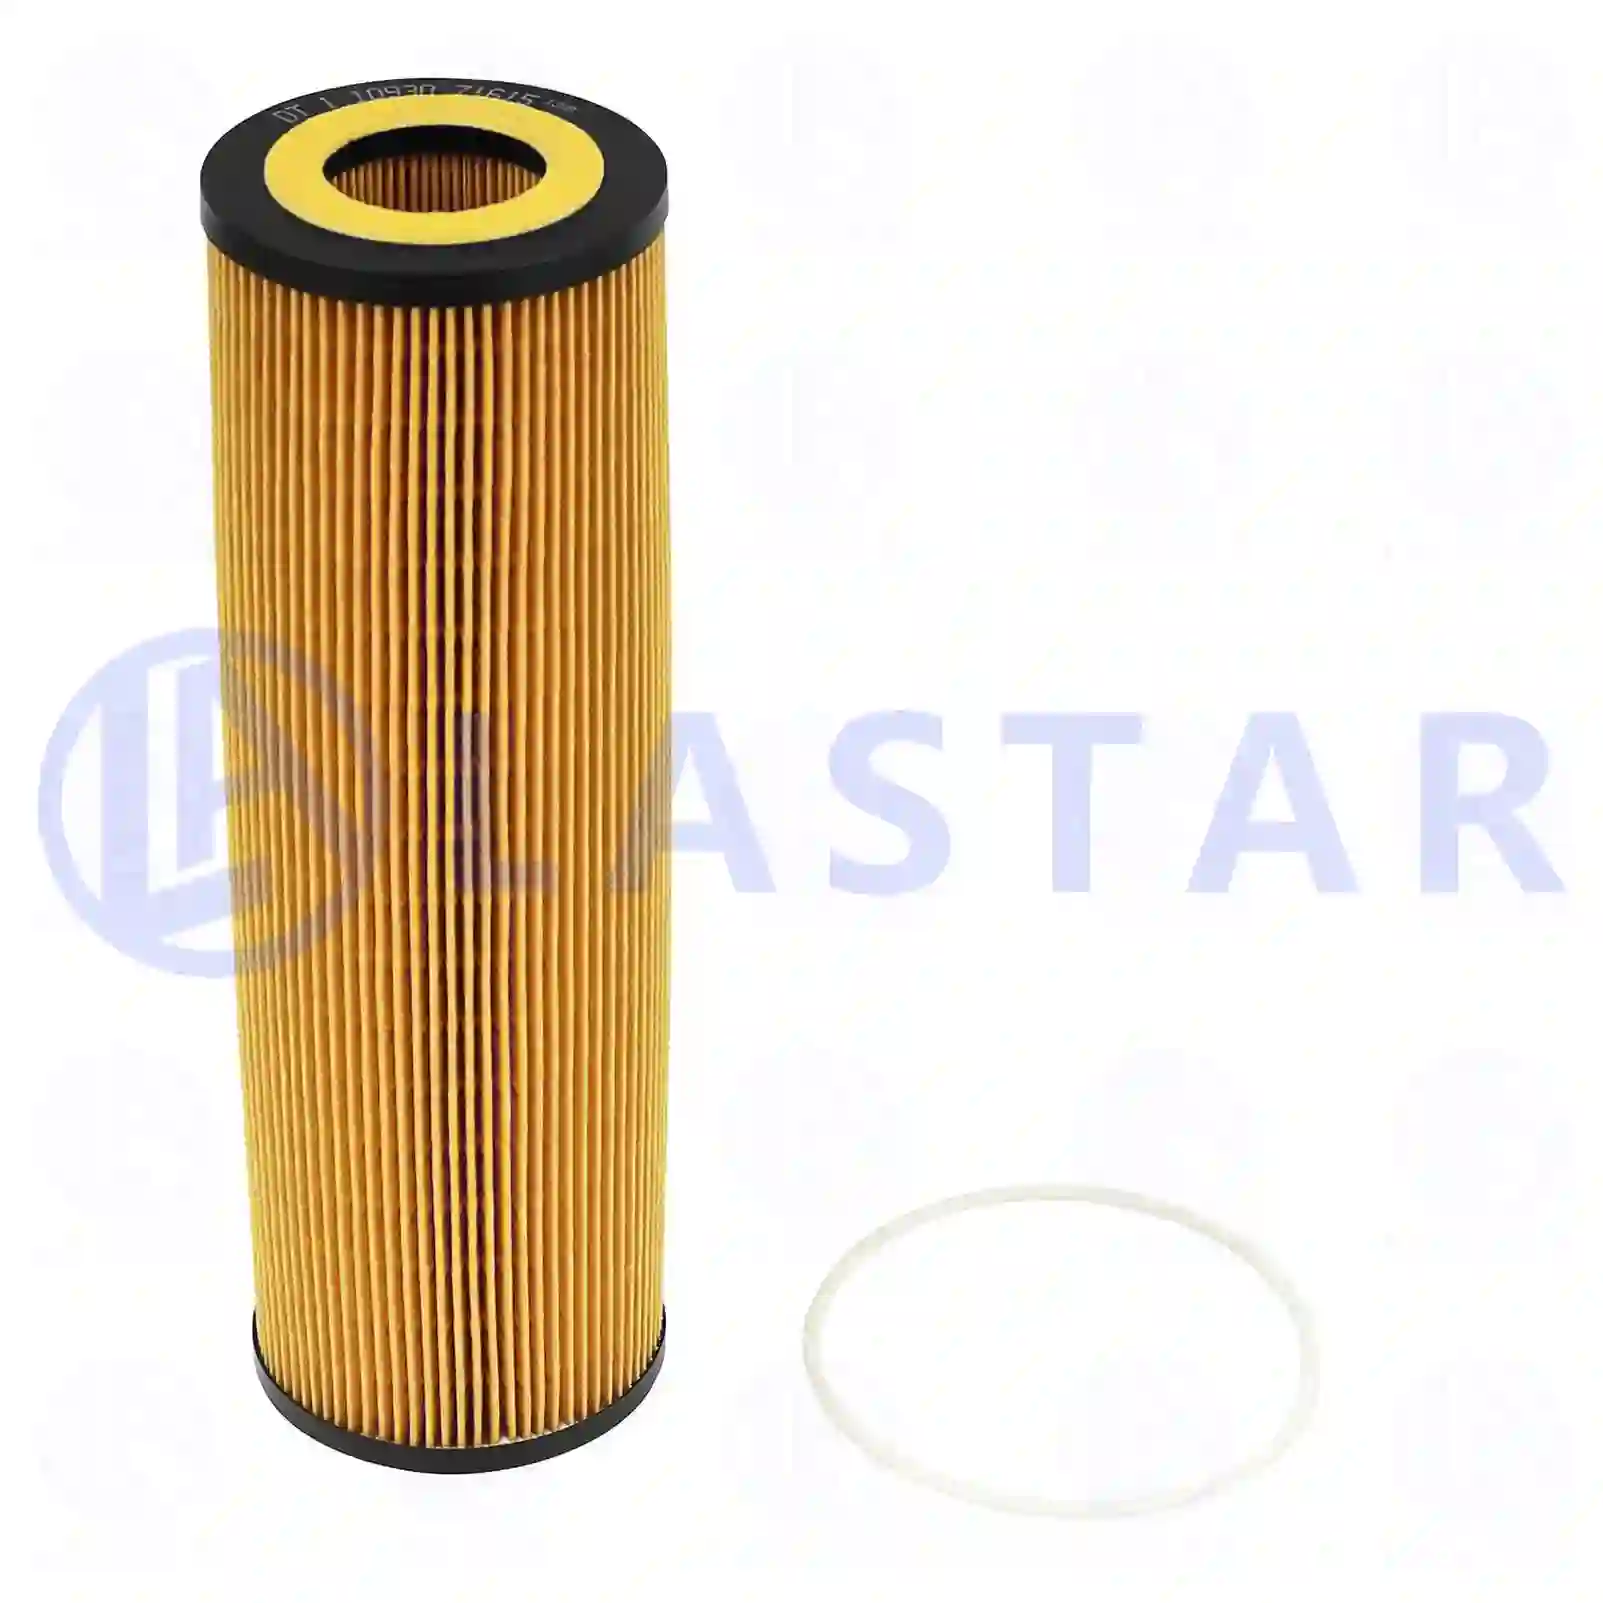 Filter insert, oil cleaner, 77703570, #YOK ||  77703570 Lastar Spare Part | Truck Spare Parts, Auotomotive Spare Parts Filter insert, oil cleaner, 77703570, #YOK ||  77703570 Lastar Spare Part | Truck Spare Parts, Auotomotive Spare Parts